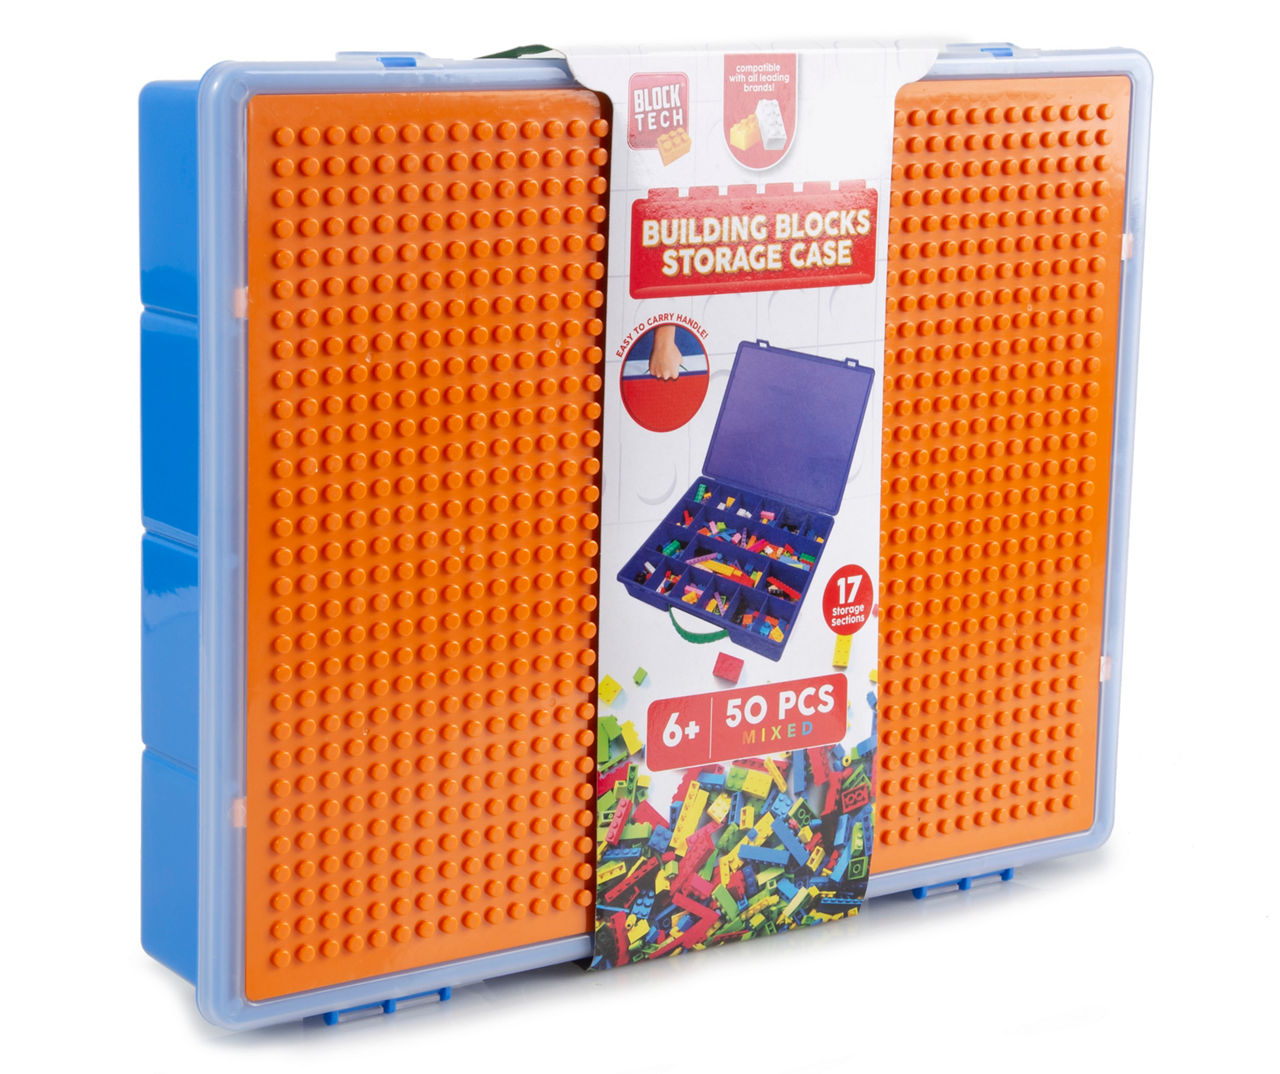 BLOCK TECH Toys R Us Build and Go Storage Case with Drawer and Handle